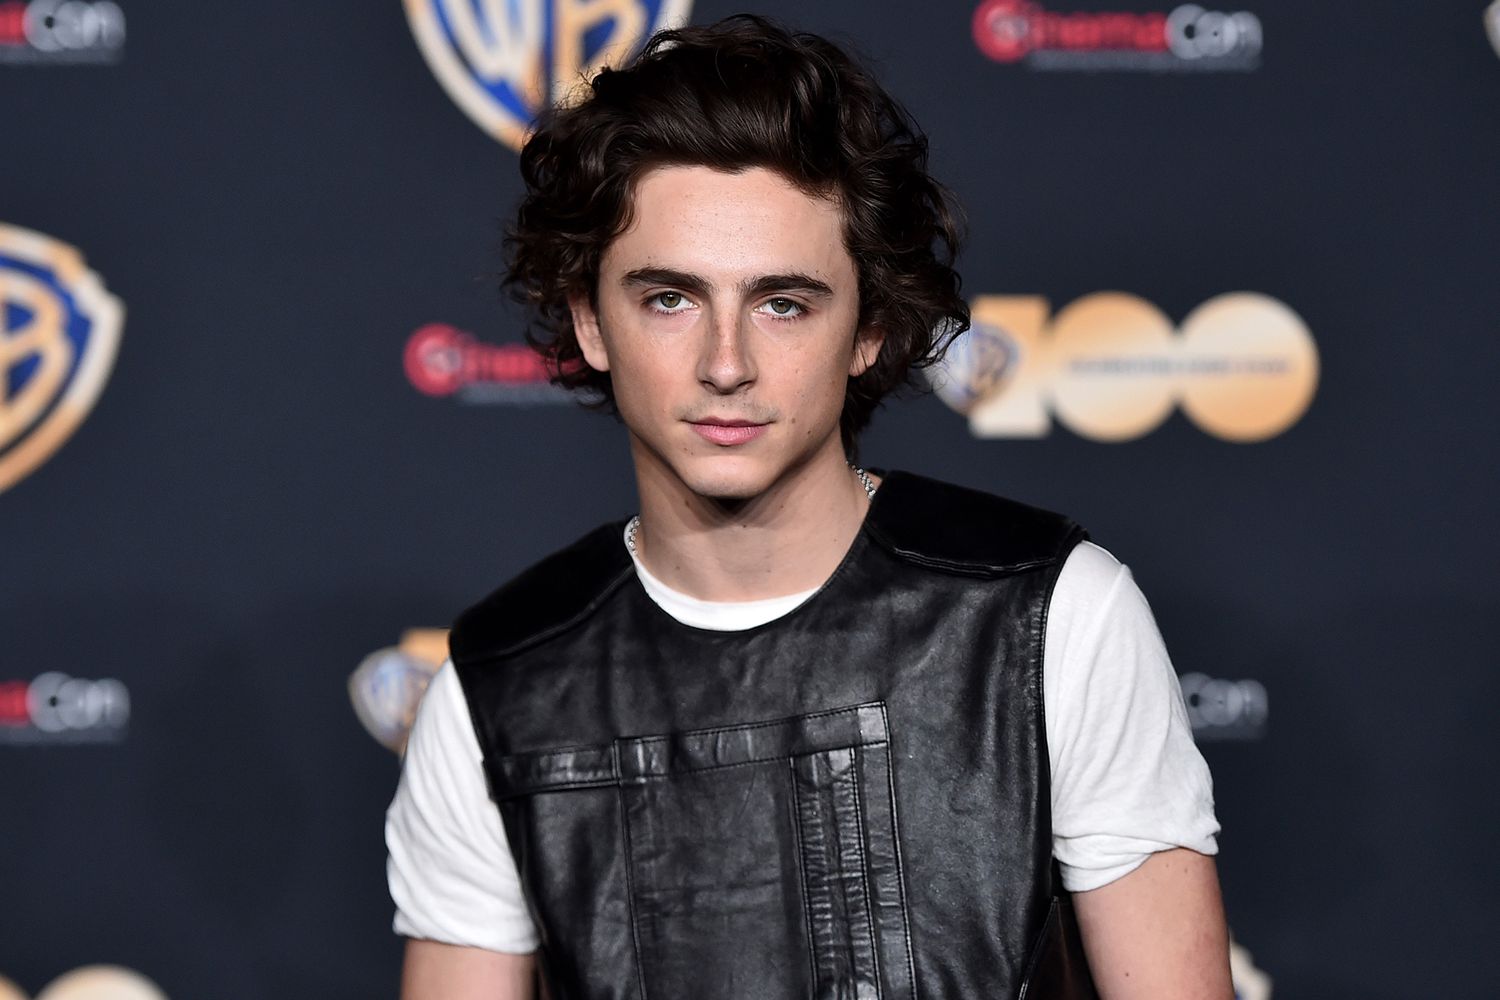 Timothée Chalamet wearing a black and white top